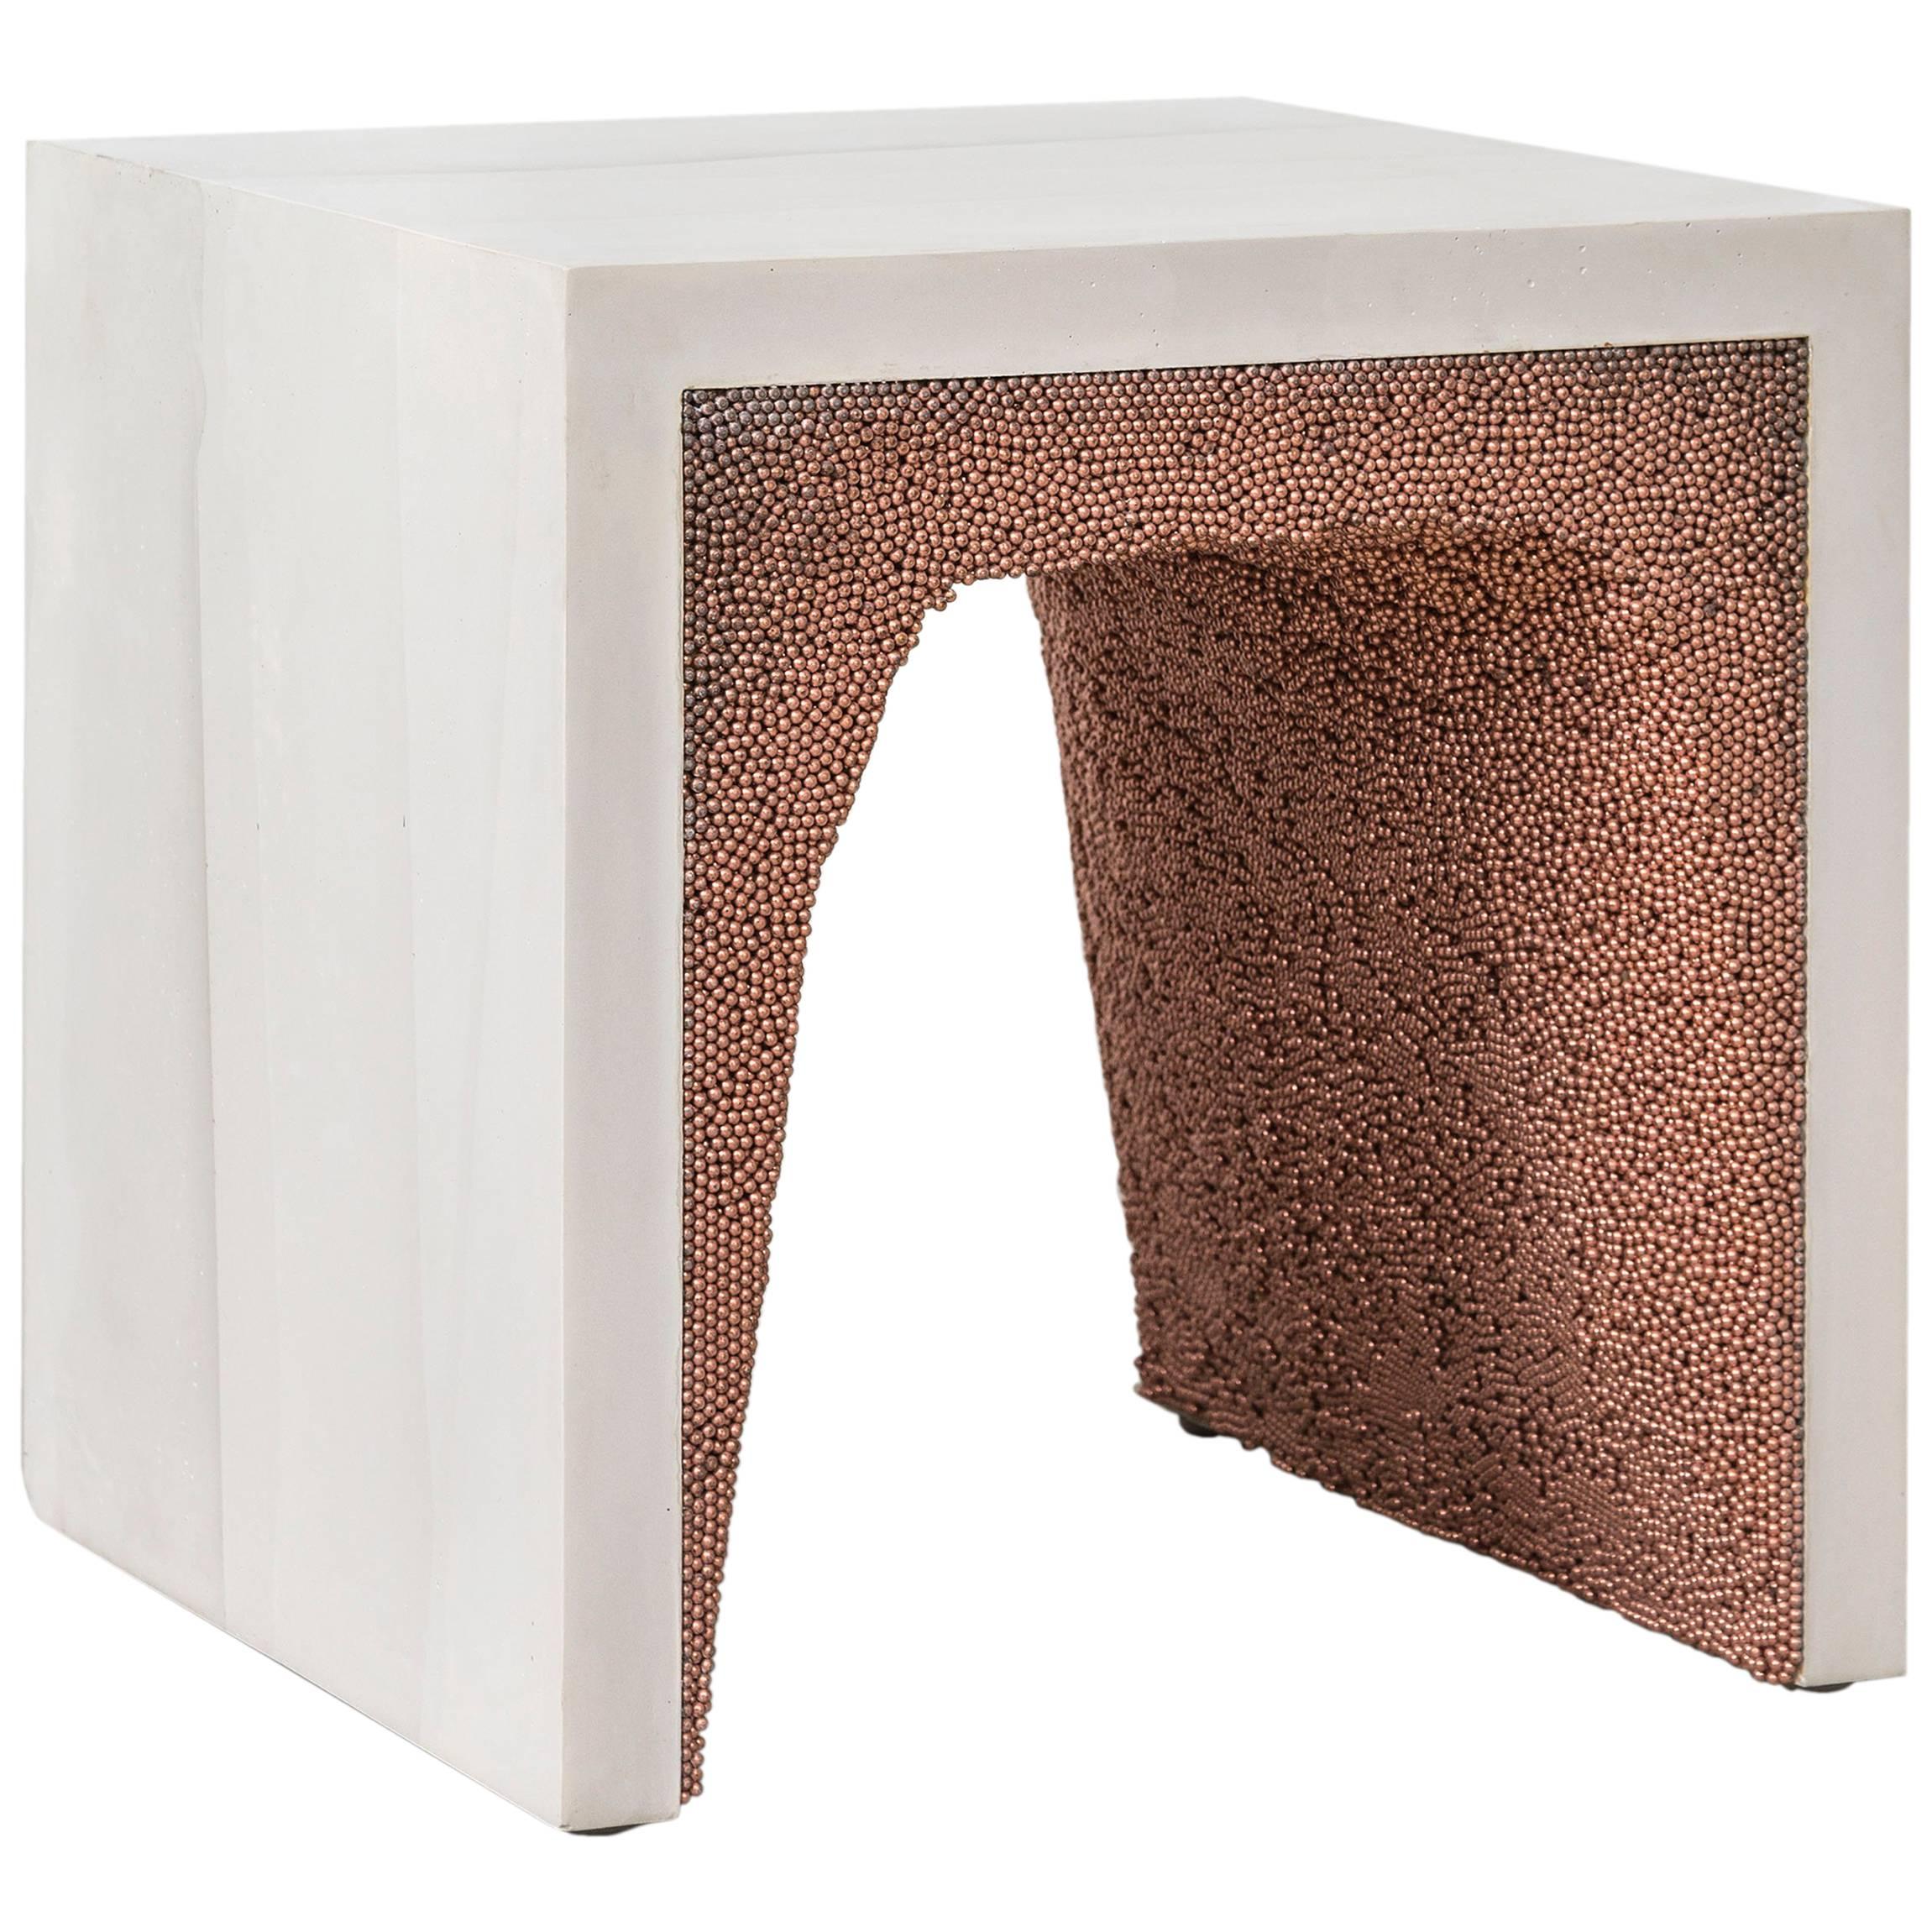 Strata 3 Side Table, White Cement and Copper BBS by Fernando Mastrangelo For Sale